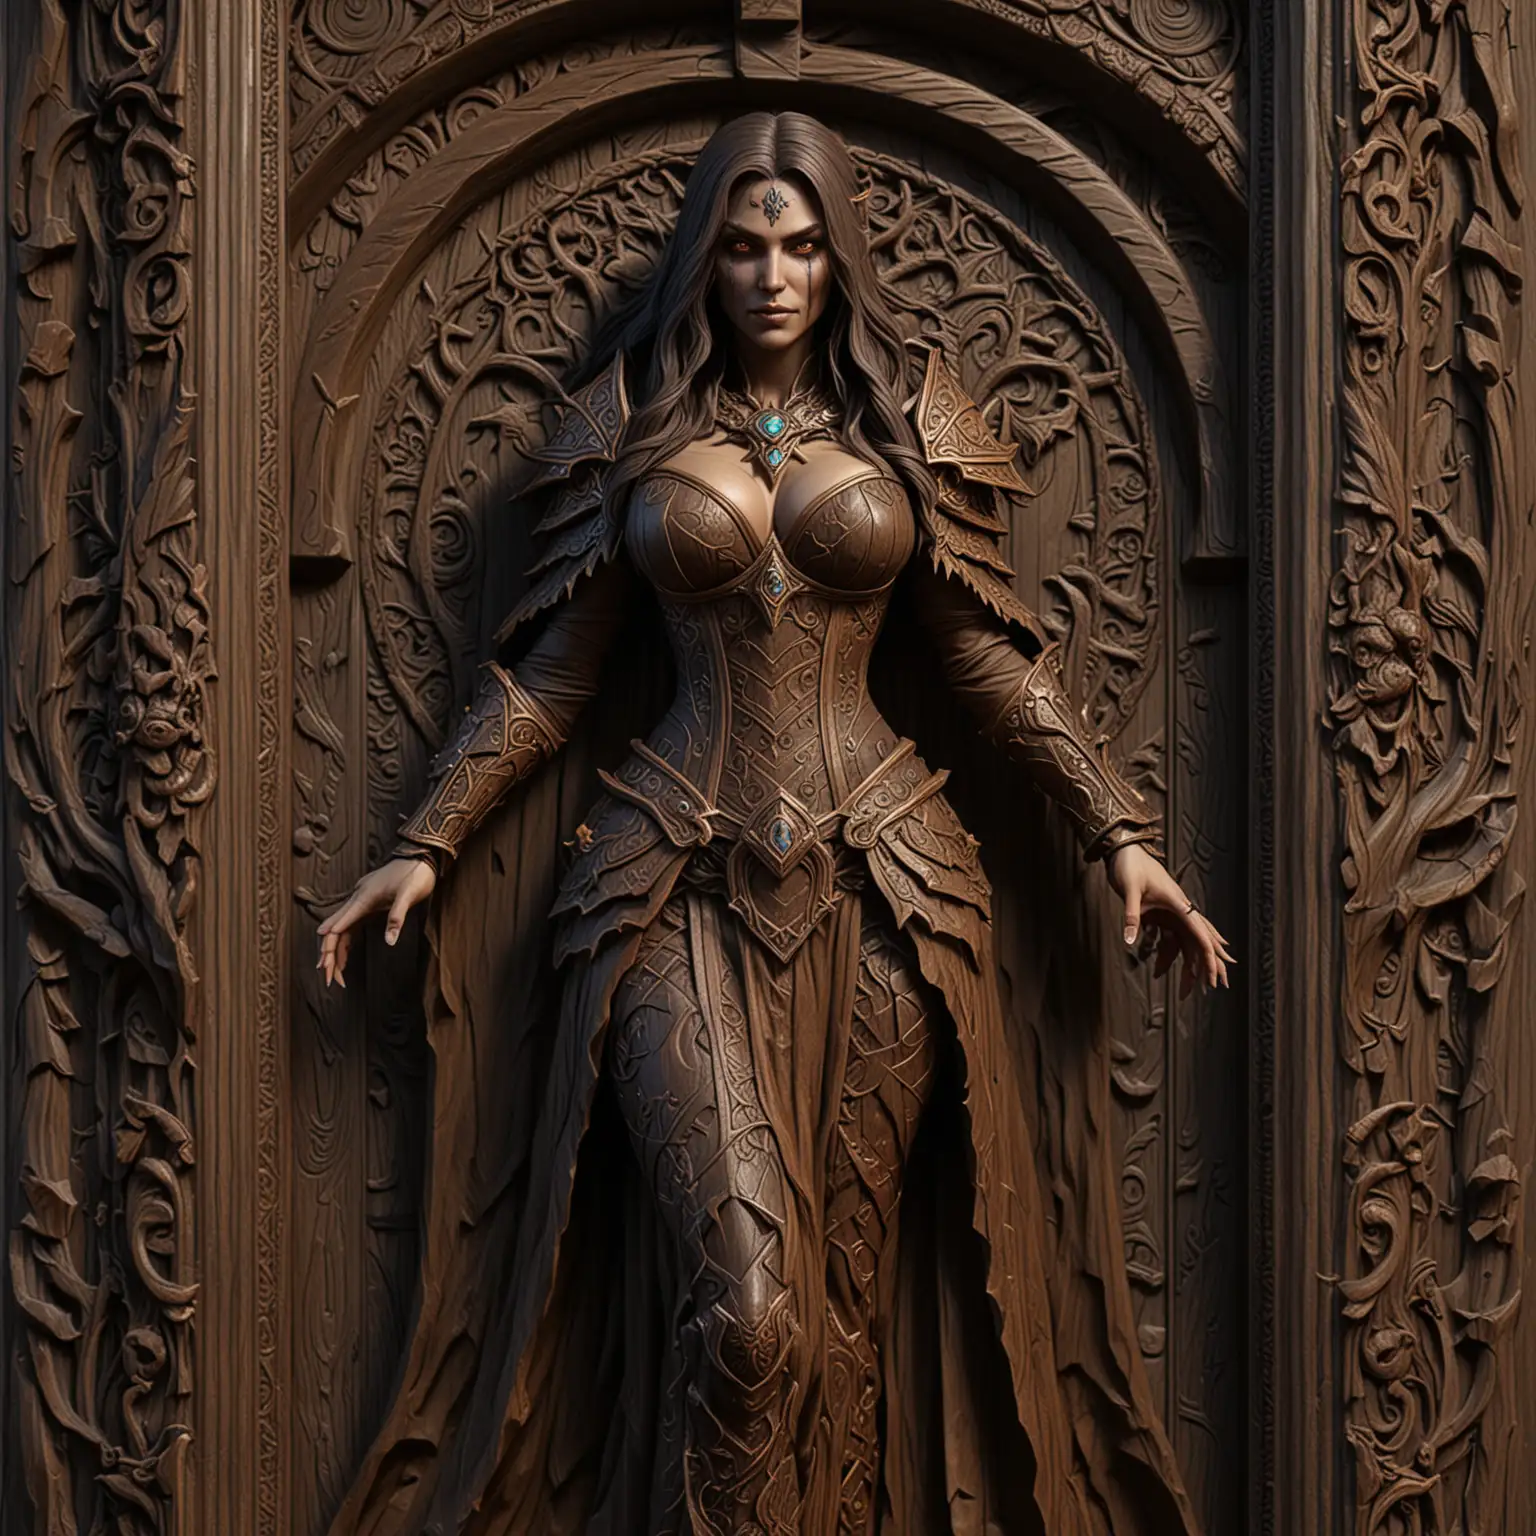 3D SEAMLESS TEXTURE, DARK CARVED WOOD WITH A CARVED WOOD FRAME, FEATURING AN INTRICATE CARVED WOOD UNDEAD FEMALE MAGE FULL BODY IN THE STYLE OF WORLD OF WARCRAFT